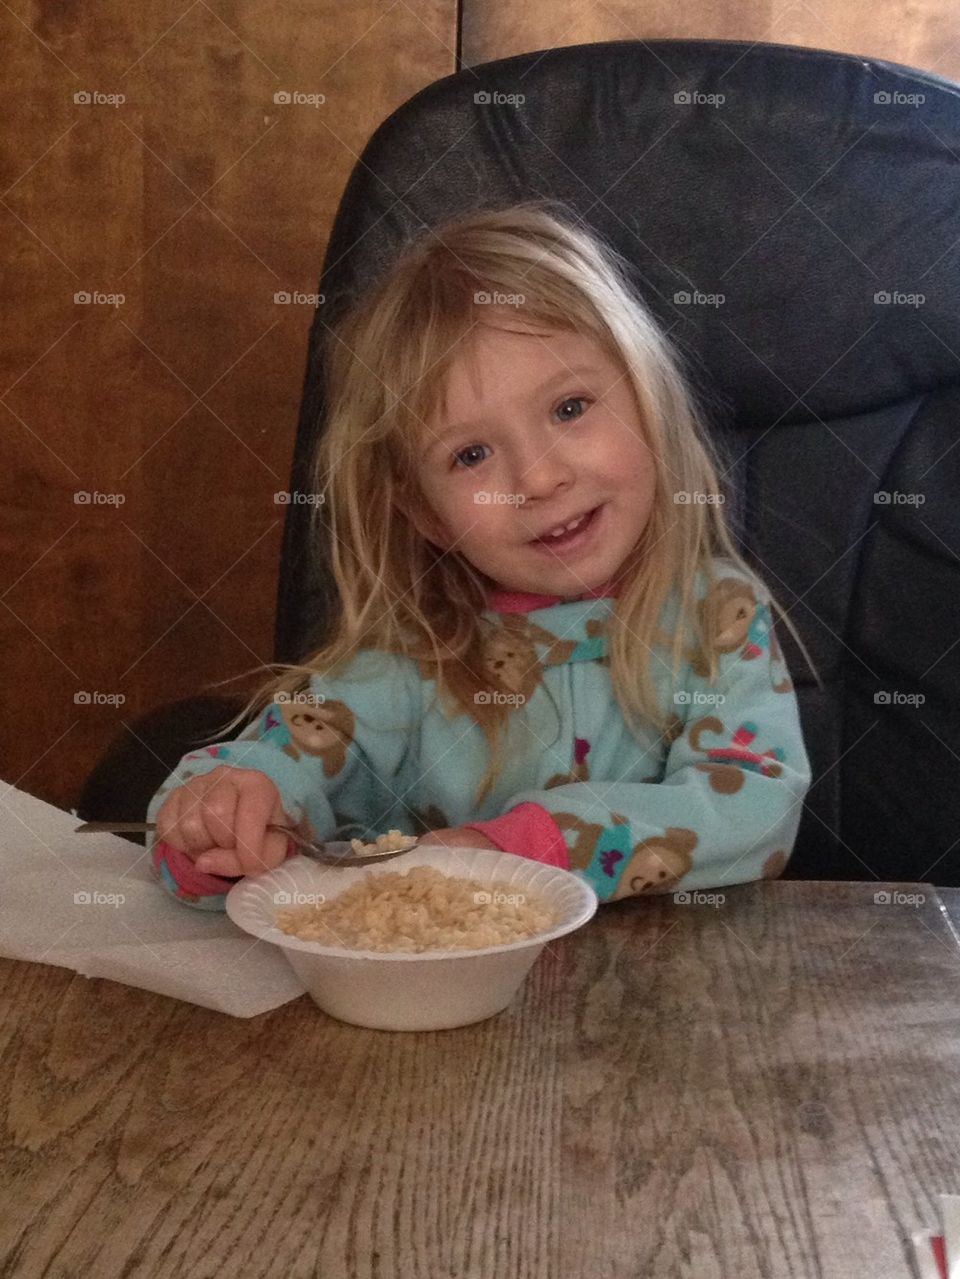 Ava eating the Rice Krispies! 